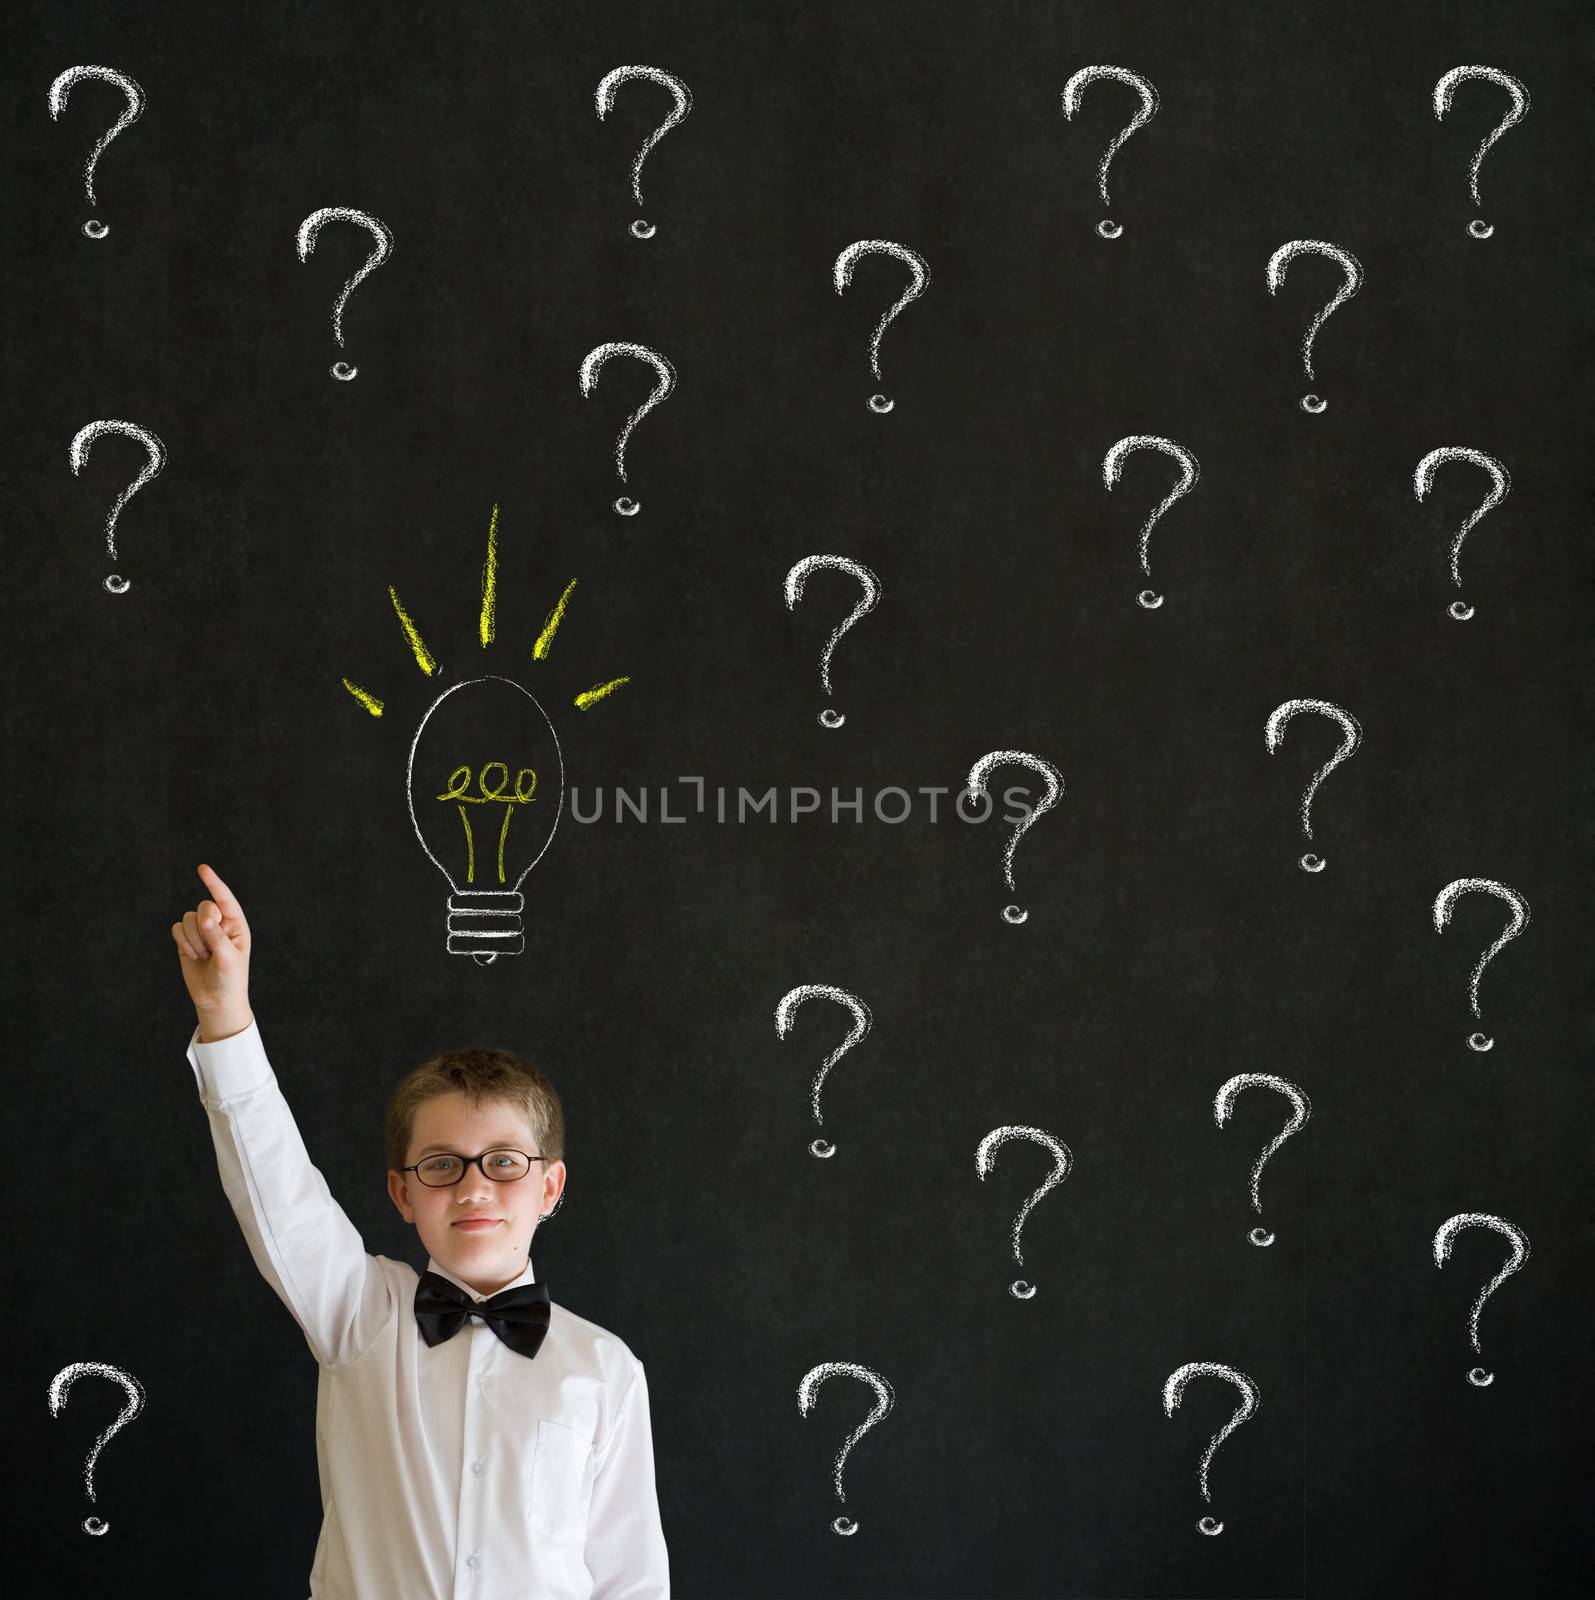 Pointing boy dressed up as business man questioning ideas on blackboard background